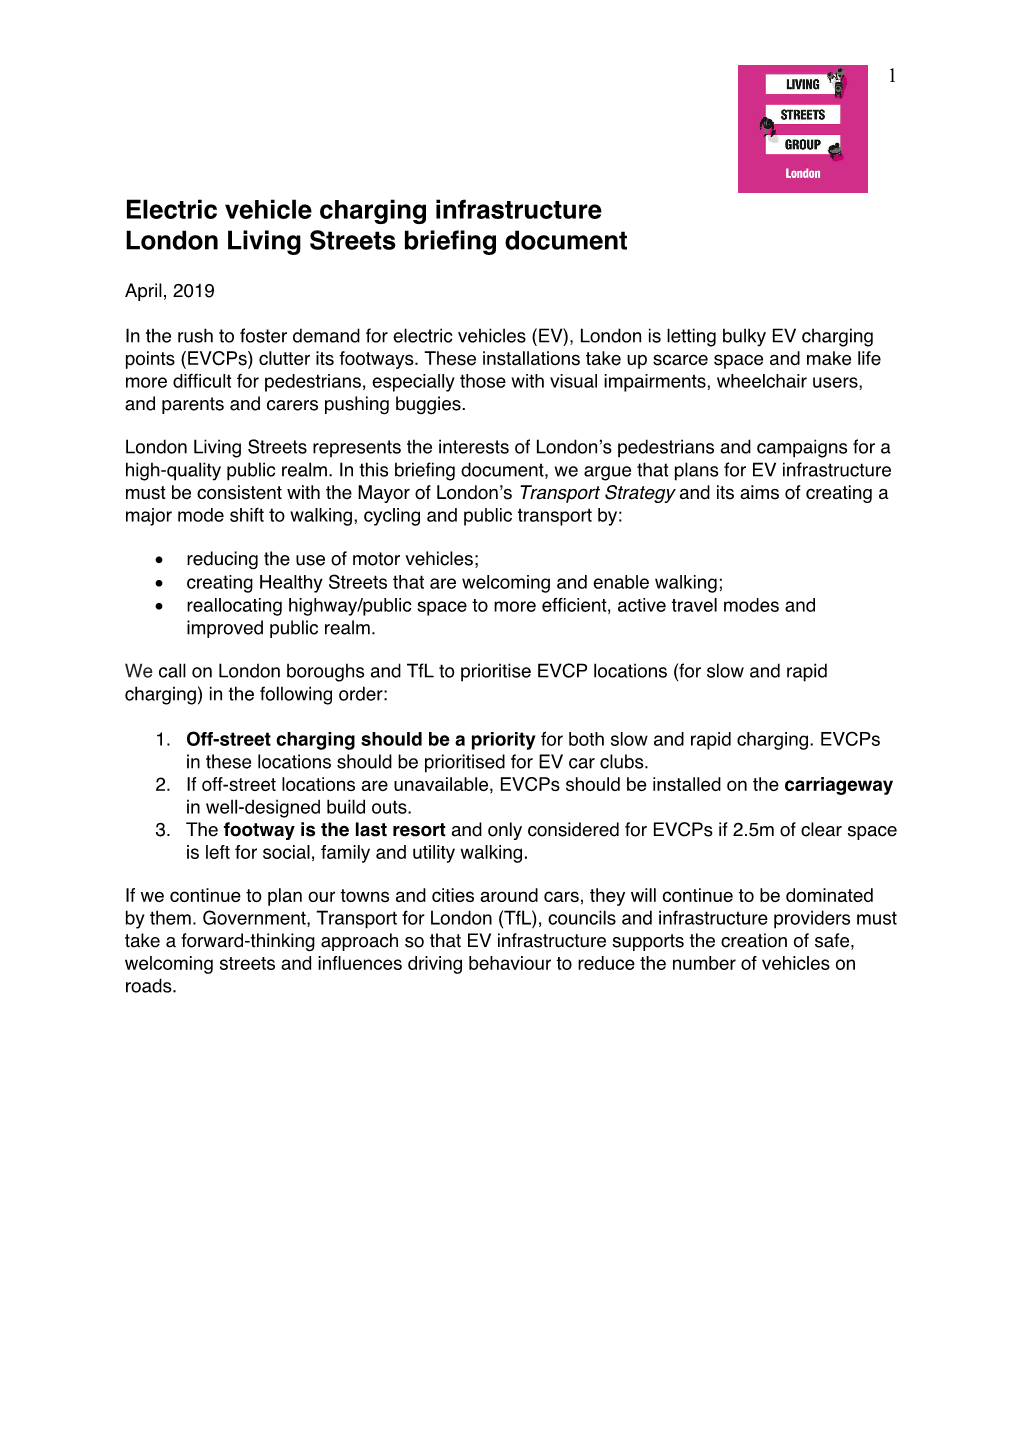 Electric Vehicle Charging Infrastructure London Living Streets Briefing Document